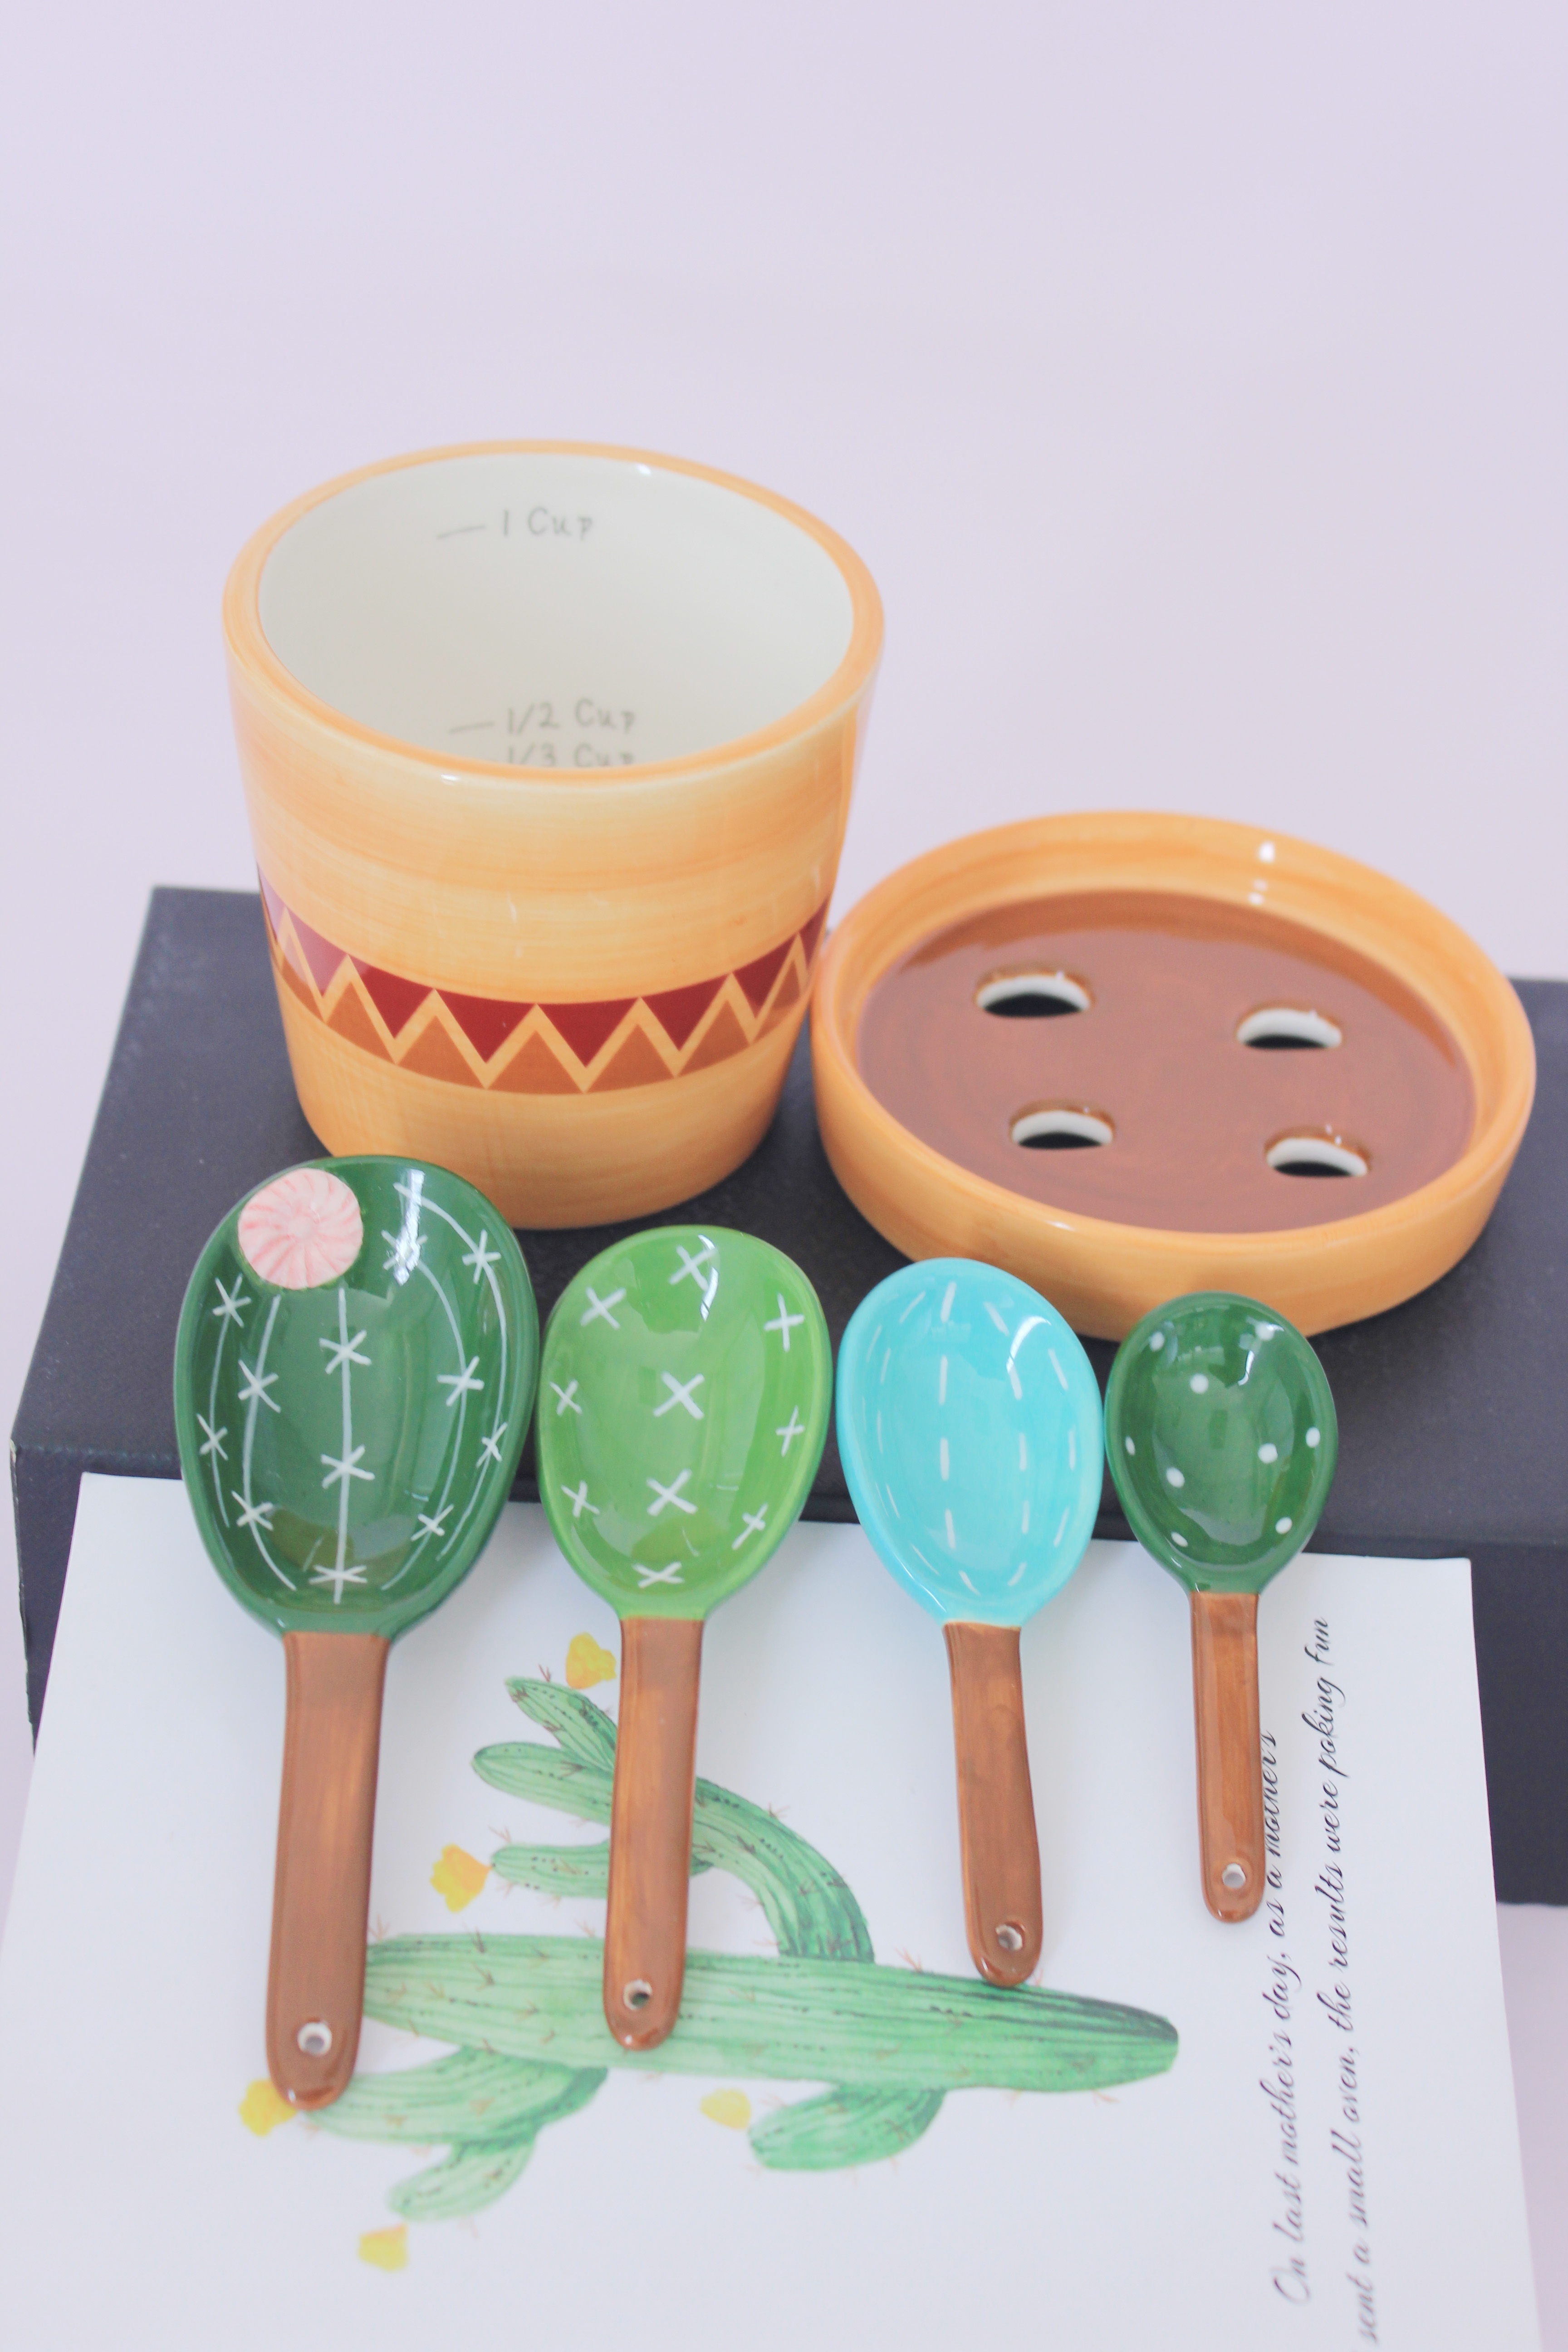 Ceramic Cactus Measuring Spoons Set, Cute Ceramic Measuring Spoons And Cups  With Holder For Milk Powder Sugar Salt, Kitchen Home Ornaments, Cute Cactus  Shape, Cute Cactus Measuring Spoons, Kitchen Supplies, Kitchen Gadgets 